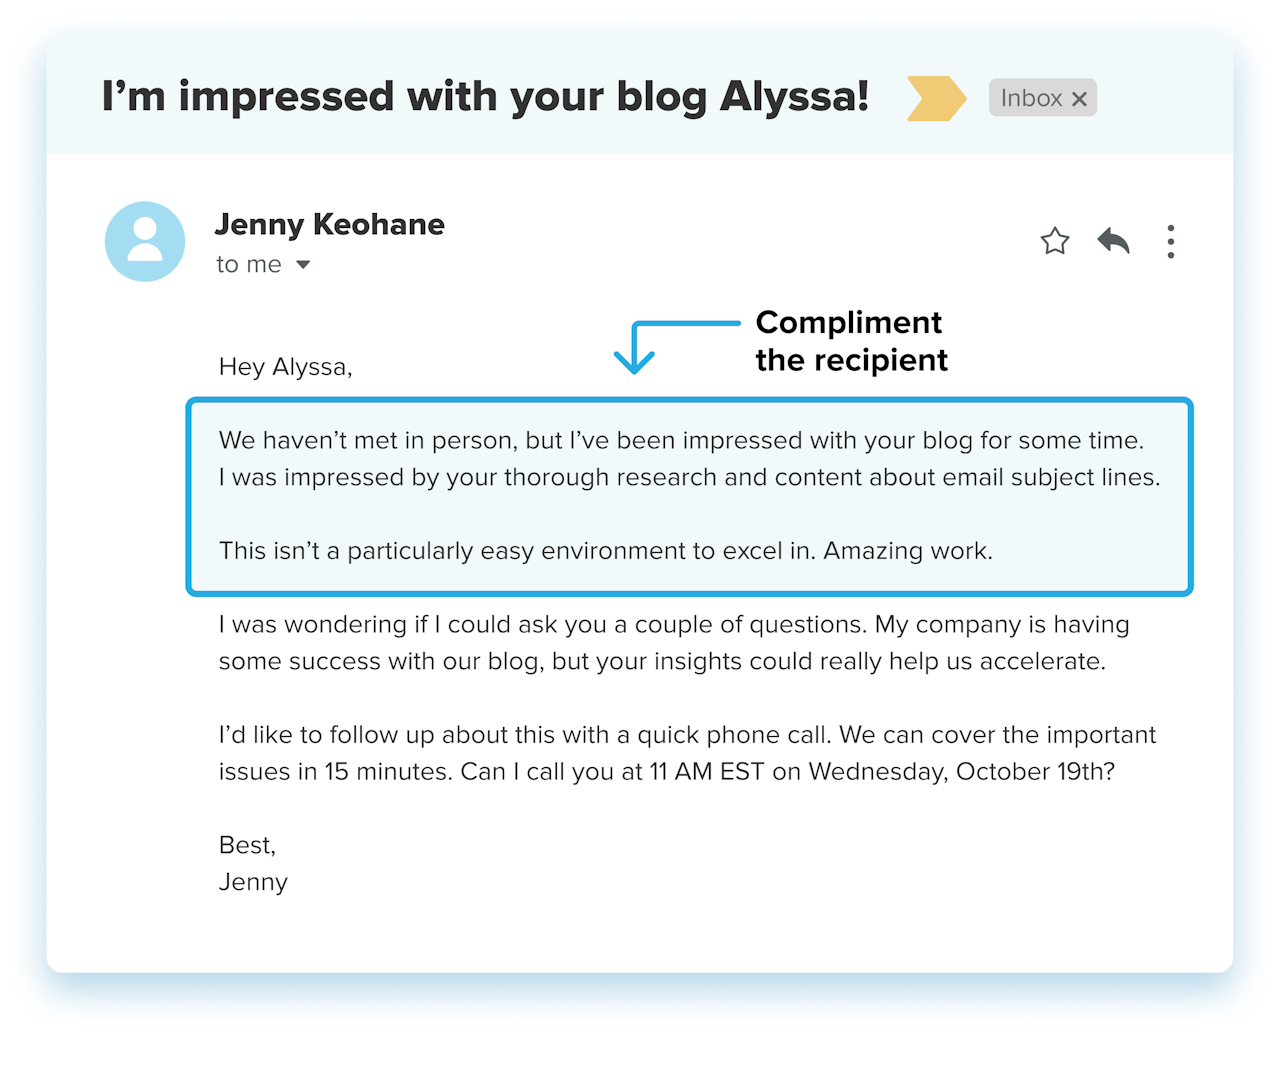 personalized email example: compliment the recipient